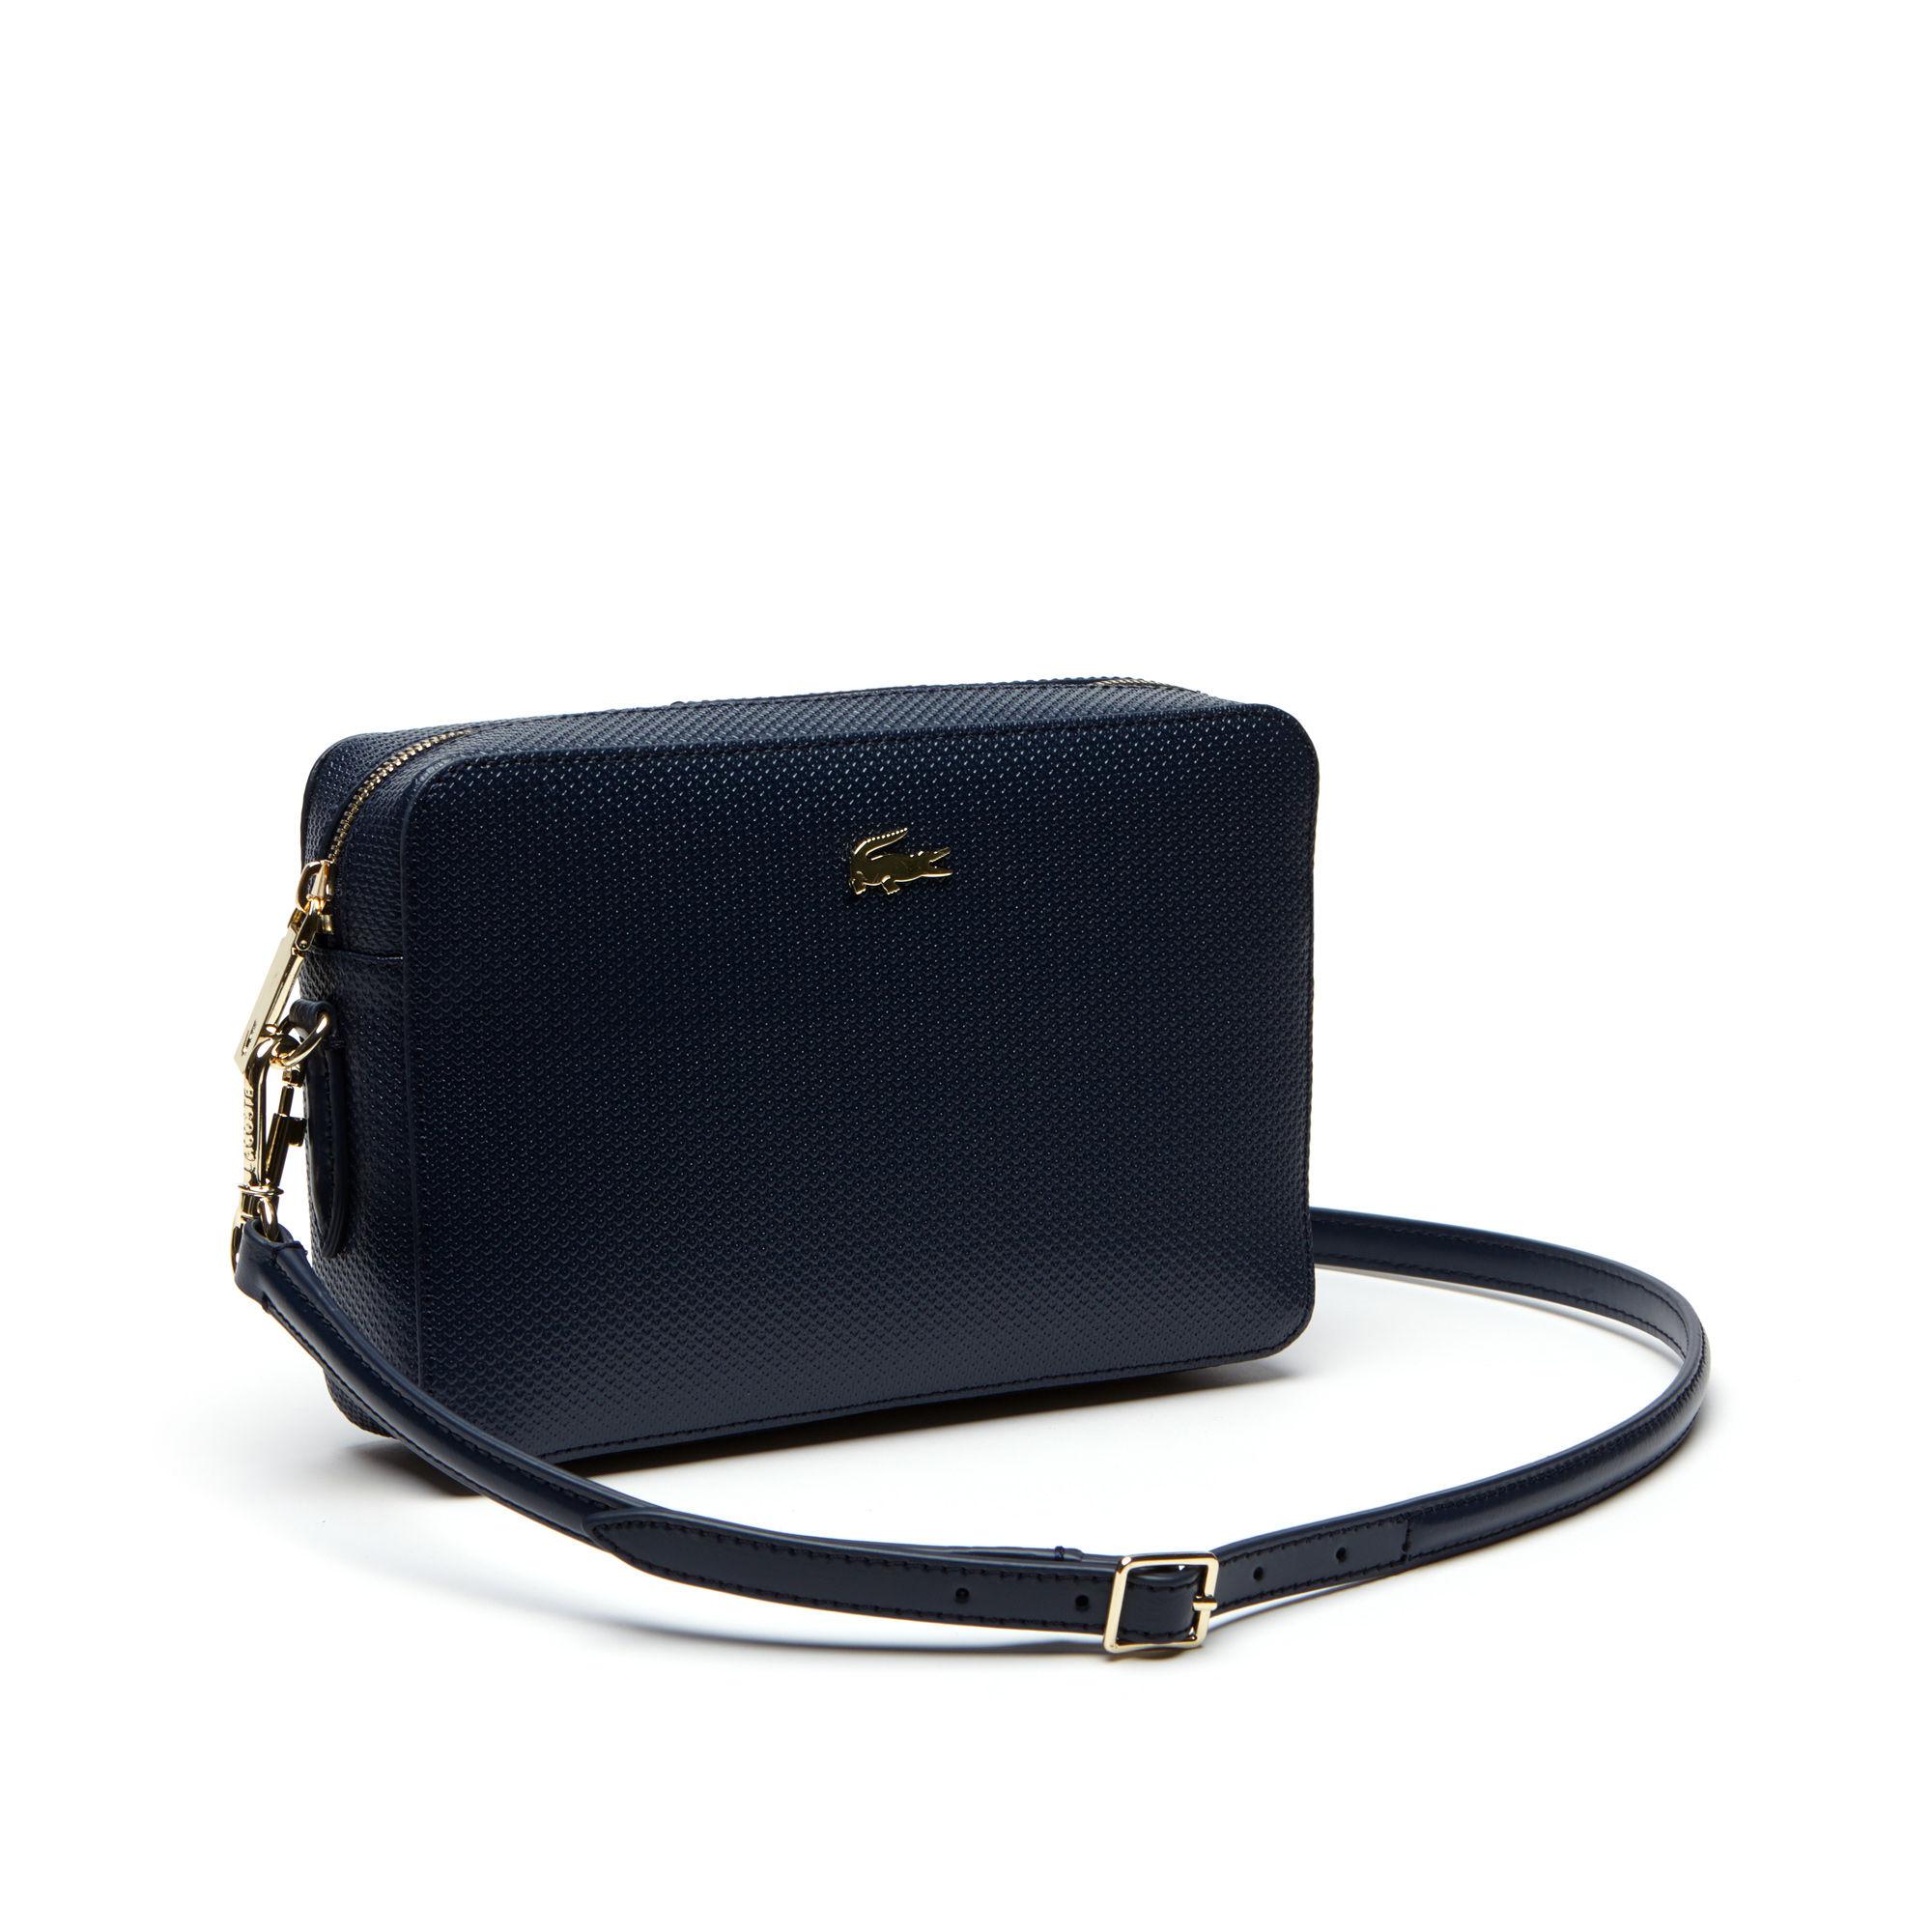 Lacoste Chantaco Piqué Leather Square Crossover Bag in Blue - Lyst